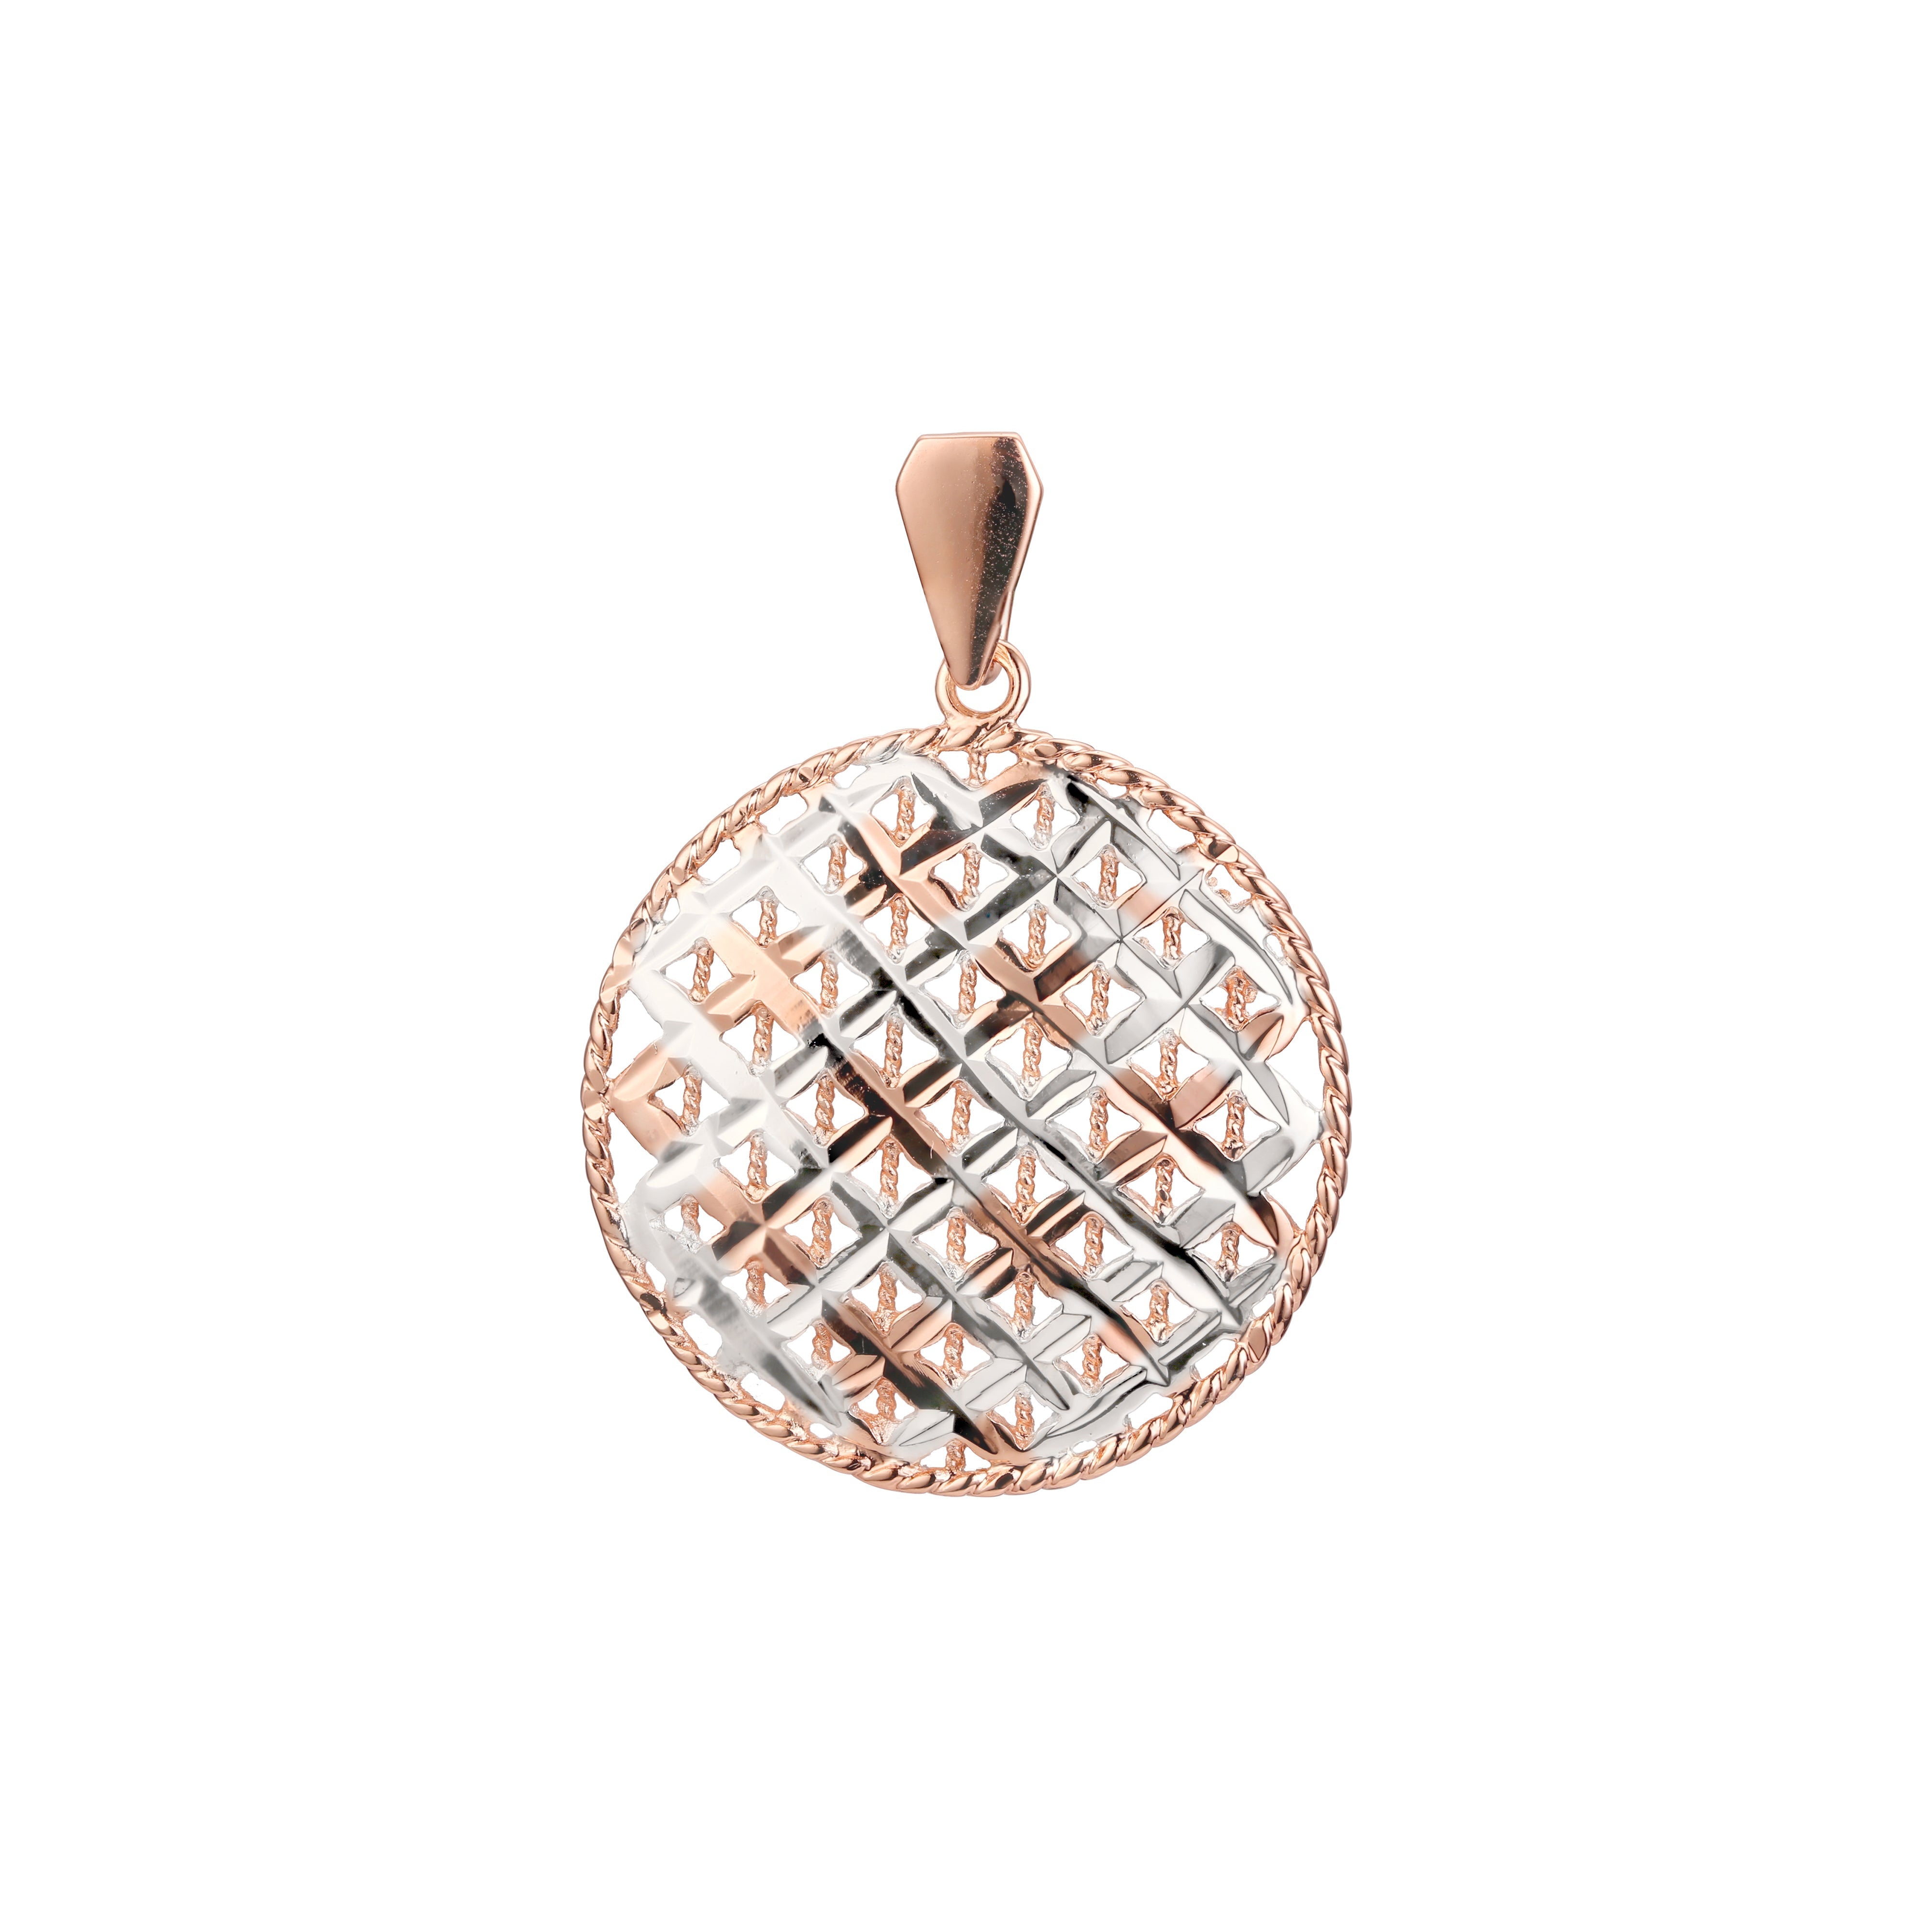 Net of cage elegant filigree pendant in 14K Gold, Rose Gold, and White Gold plating colors